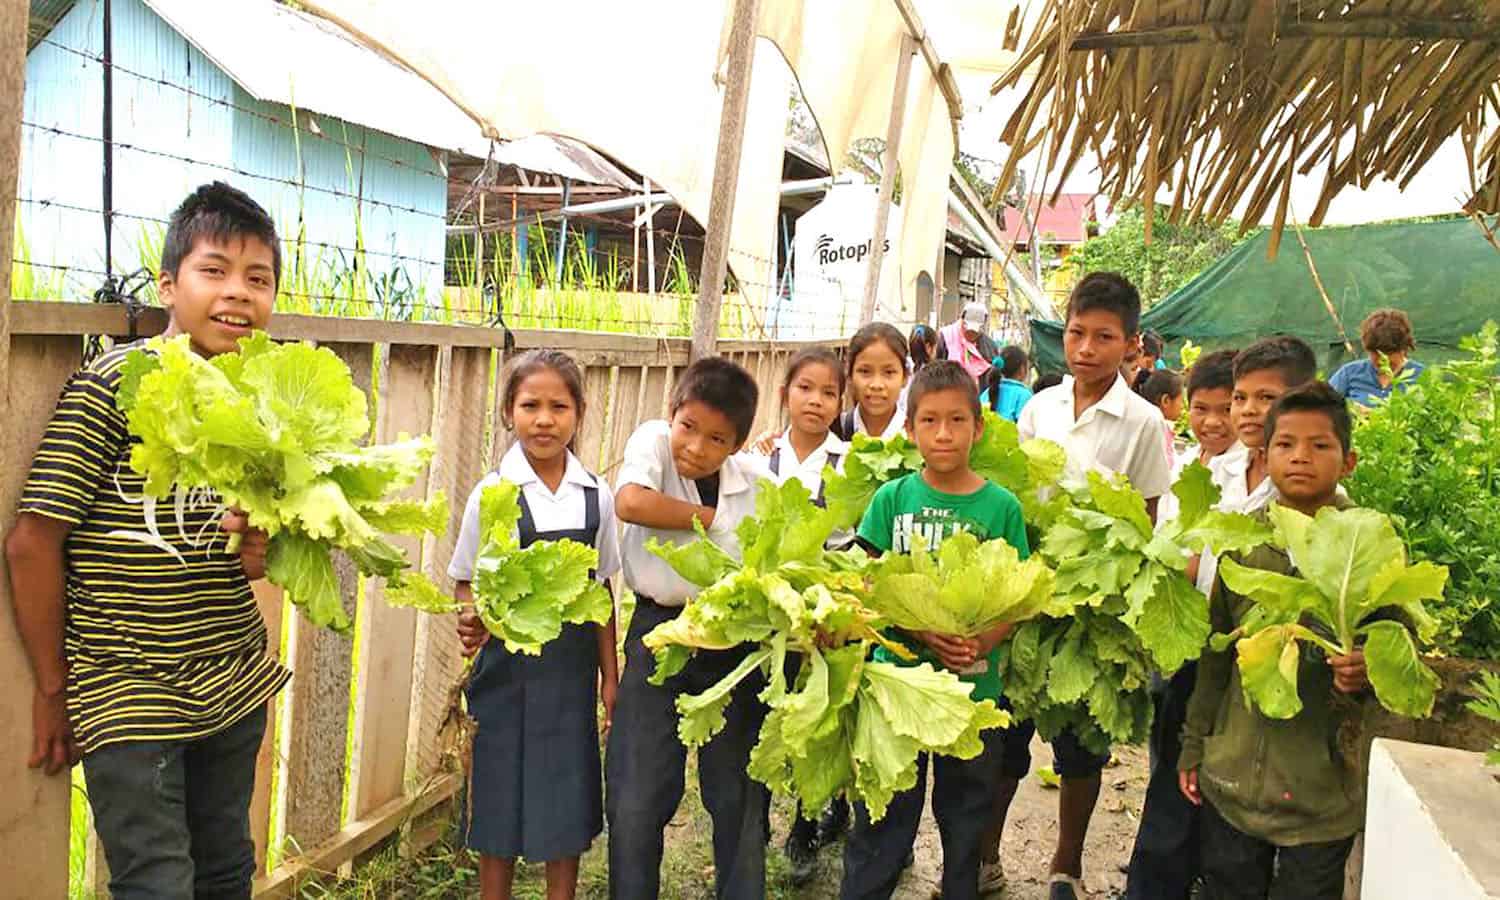 INMED Partnerships for Children is improving food security and creating opportunities for small farmers through their adaptive aquaponics programs.